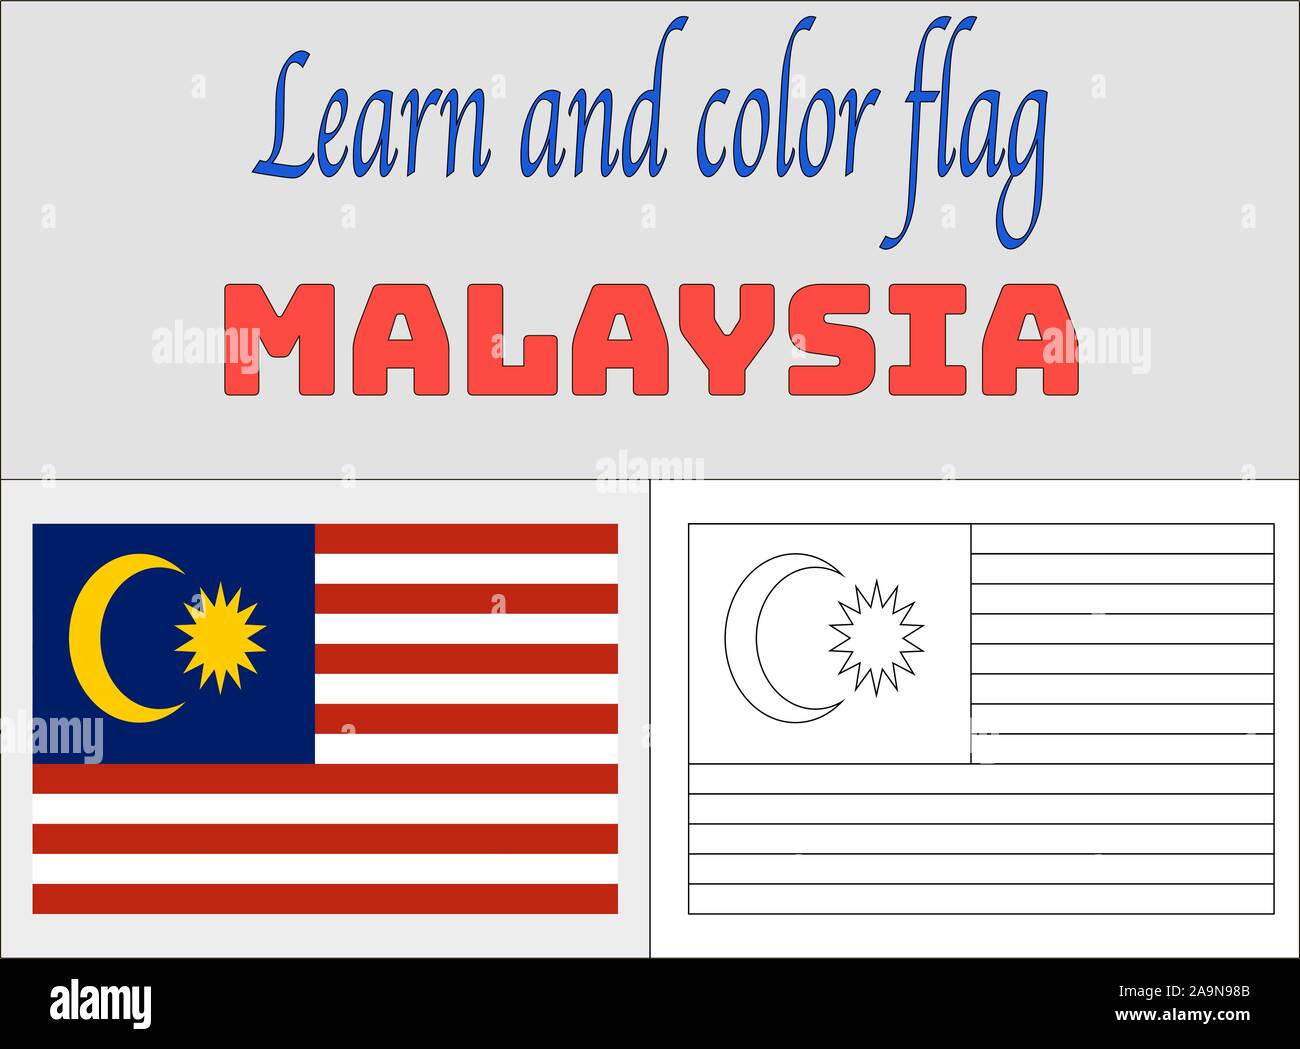 Download Asian Malaysia National Flag Coloring Book Pages For Education And Learning Original Colors Proportion Vector Illustration Countries Set Stock Vector Image Art Alamy